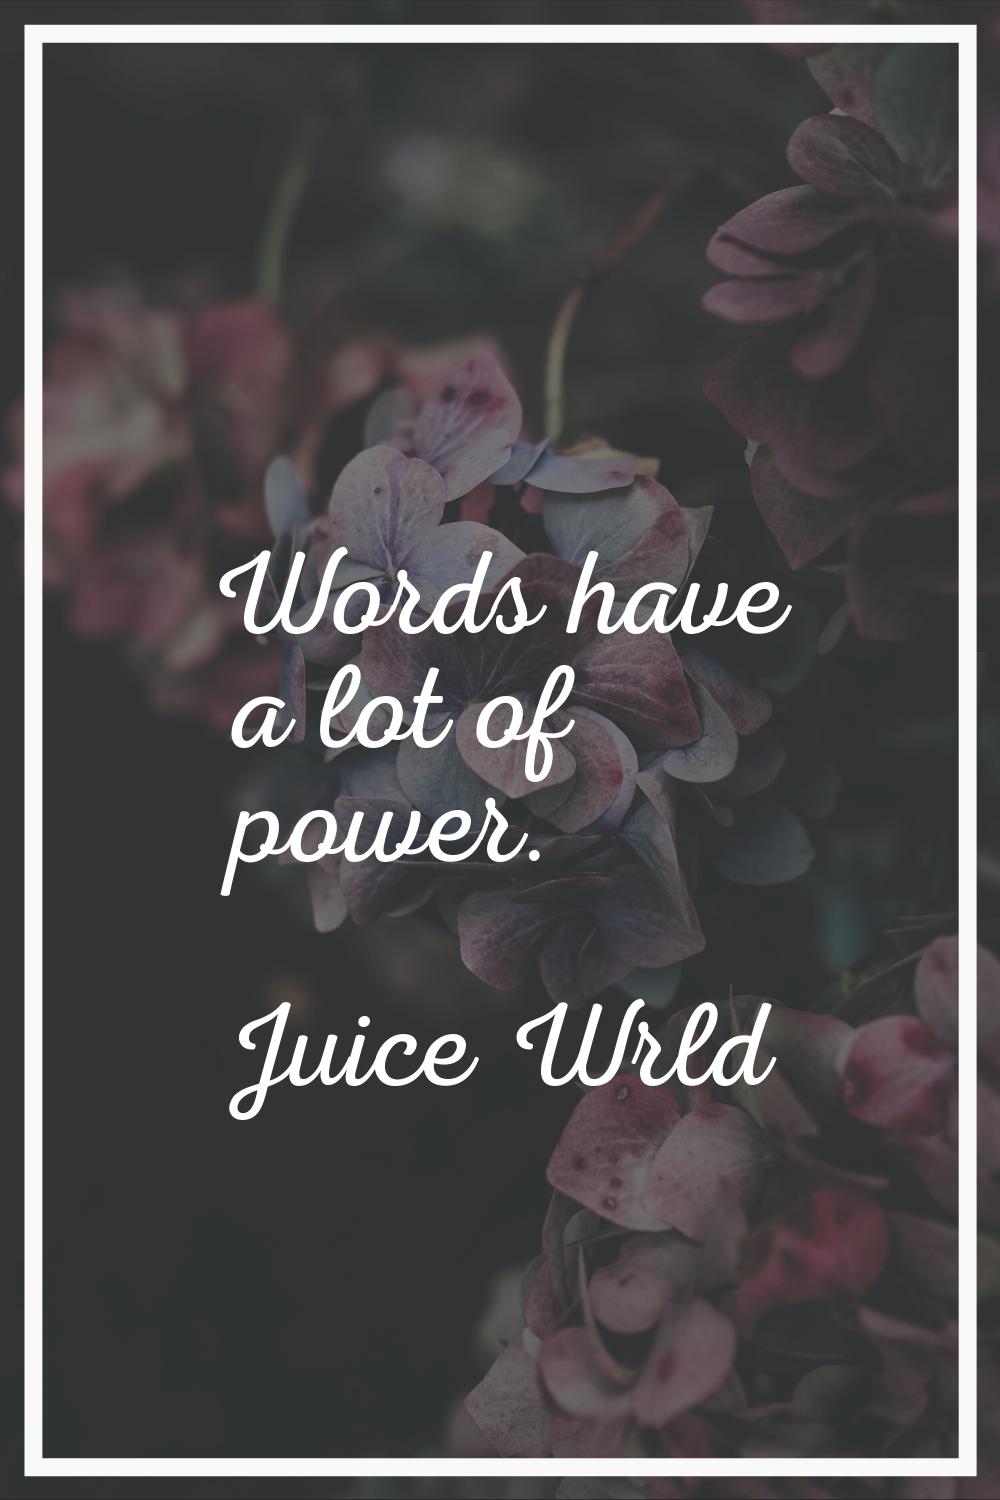 Words have a lot of power.